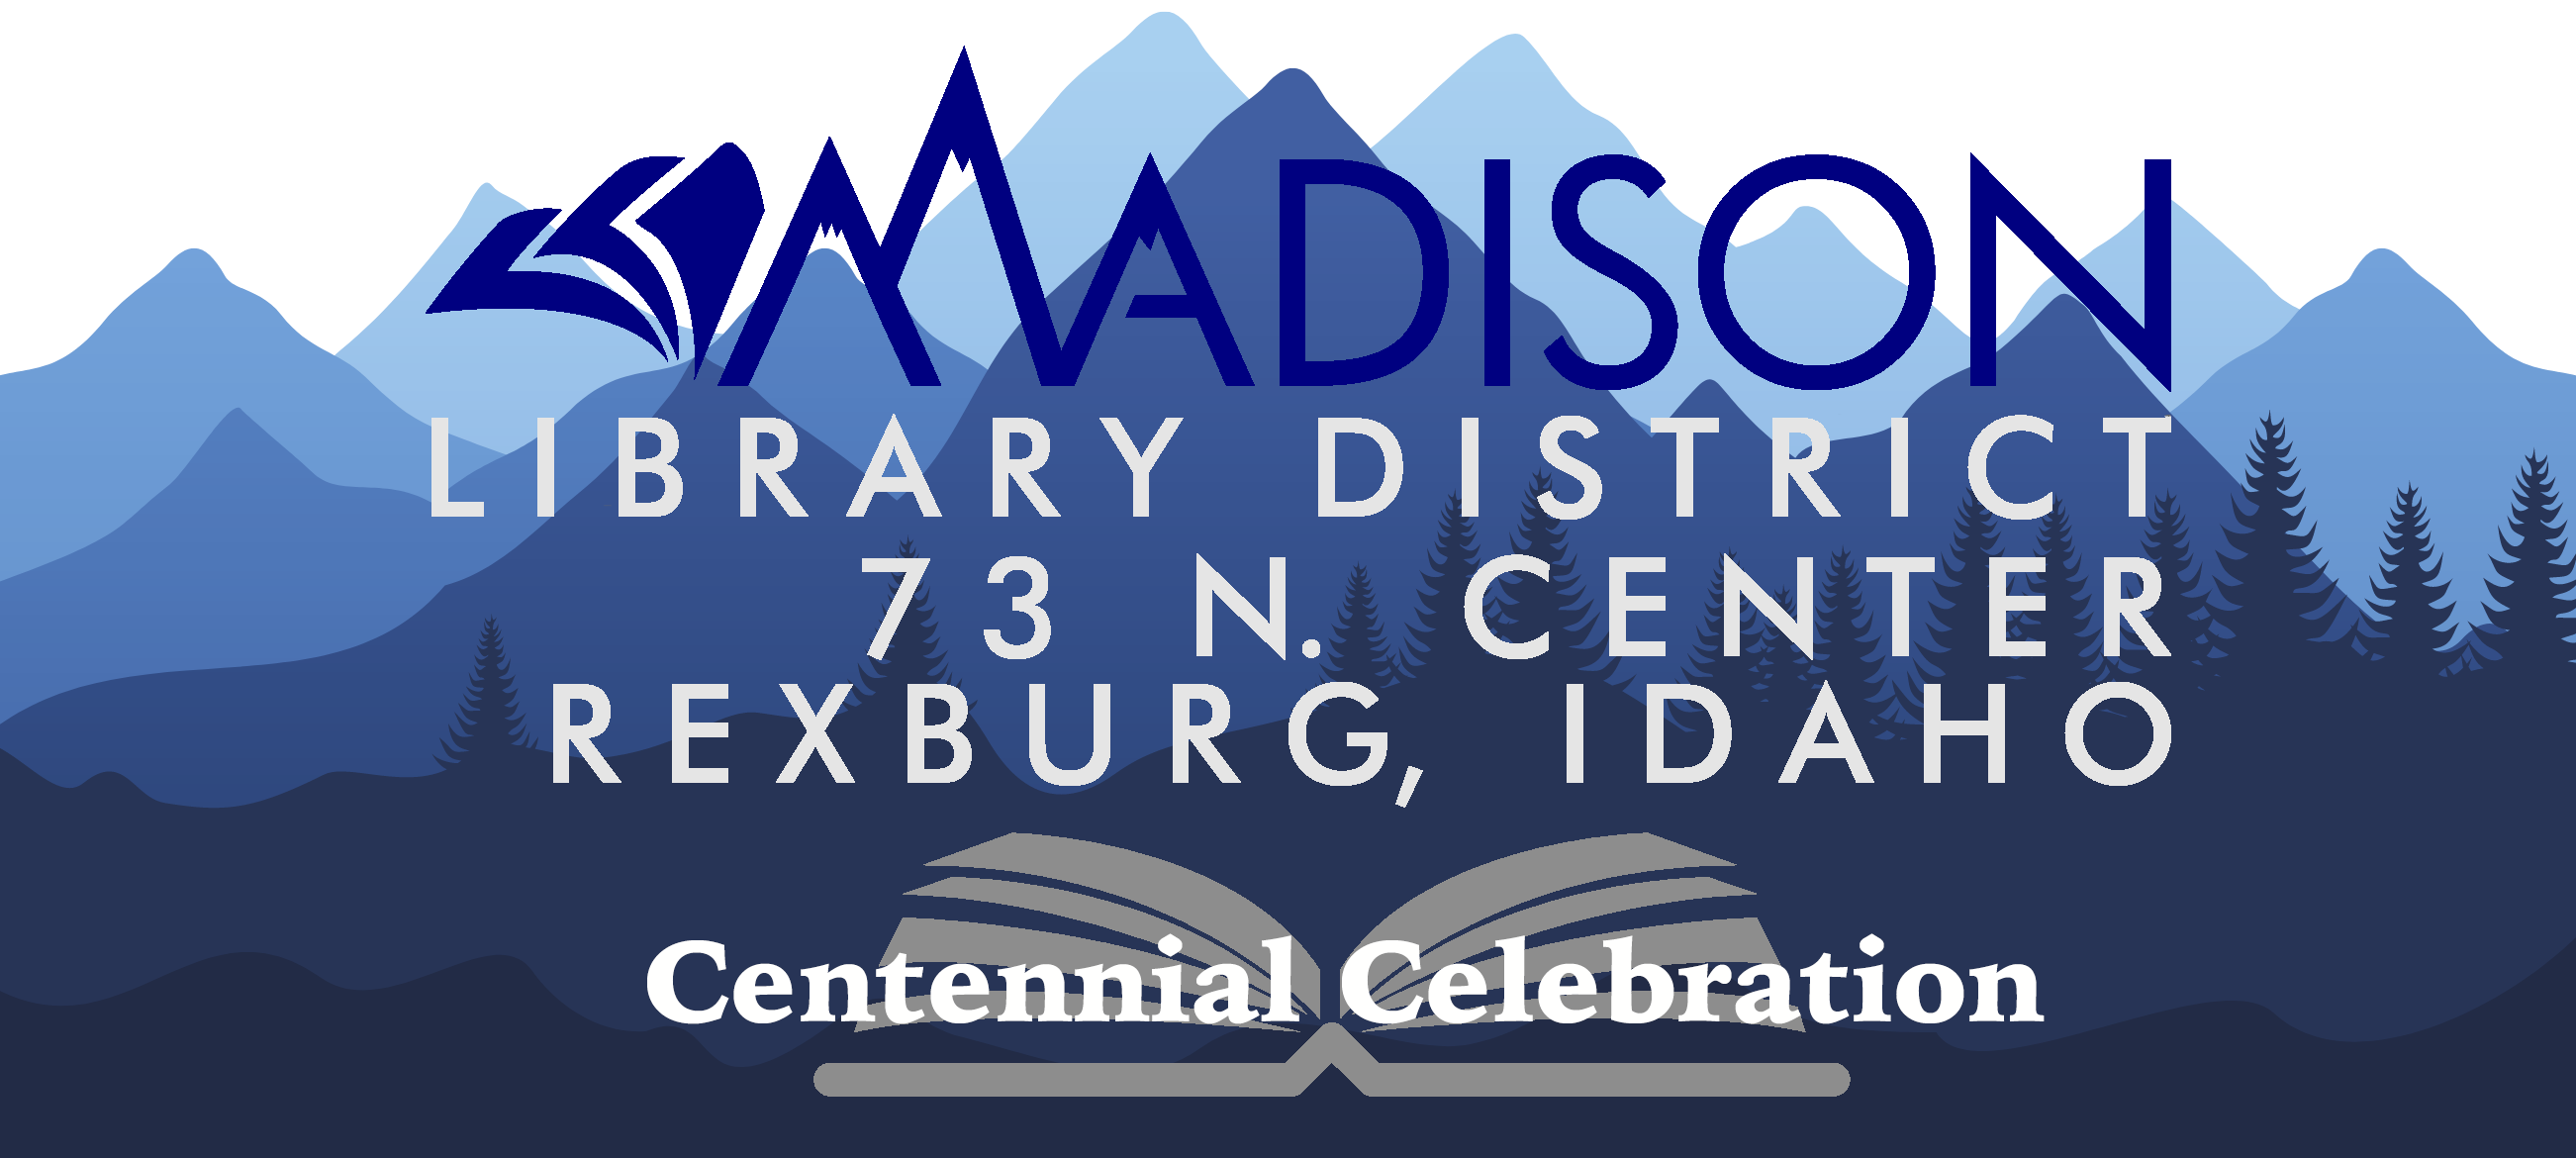 Madison Library District